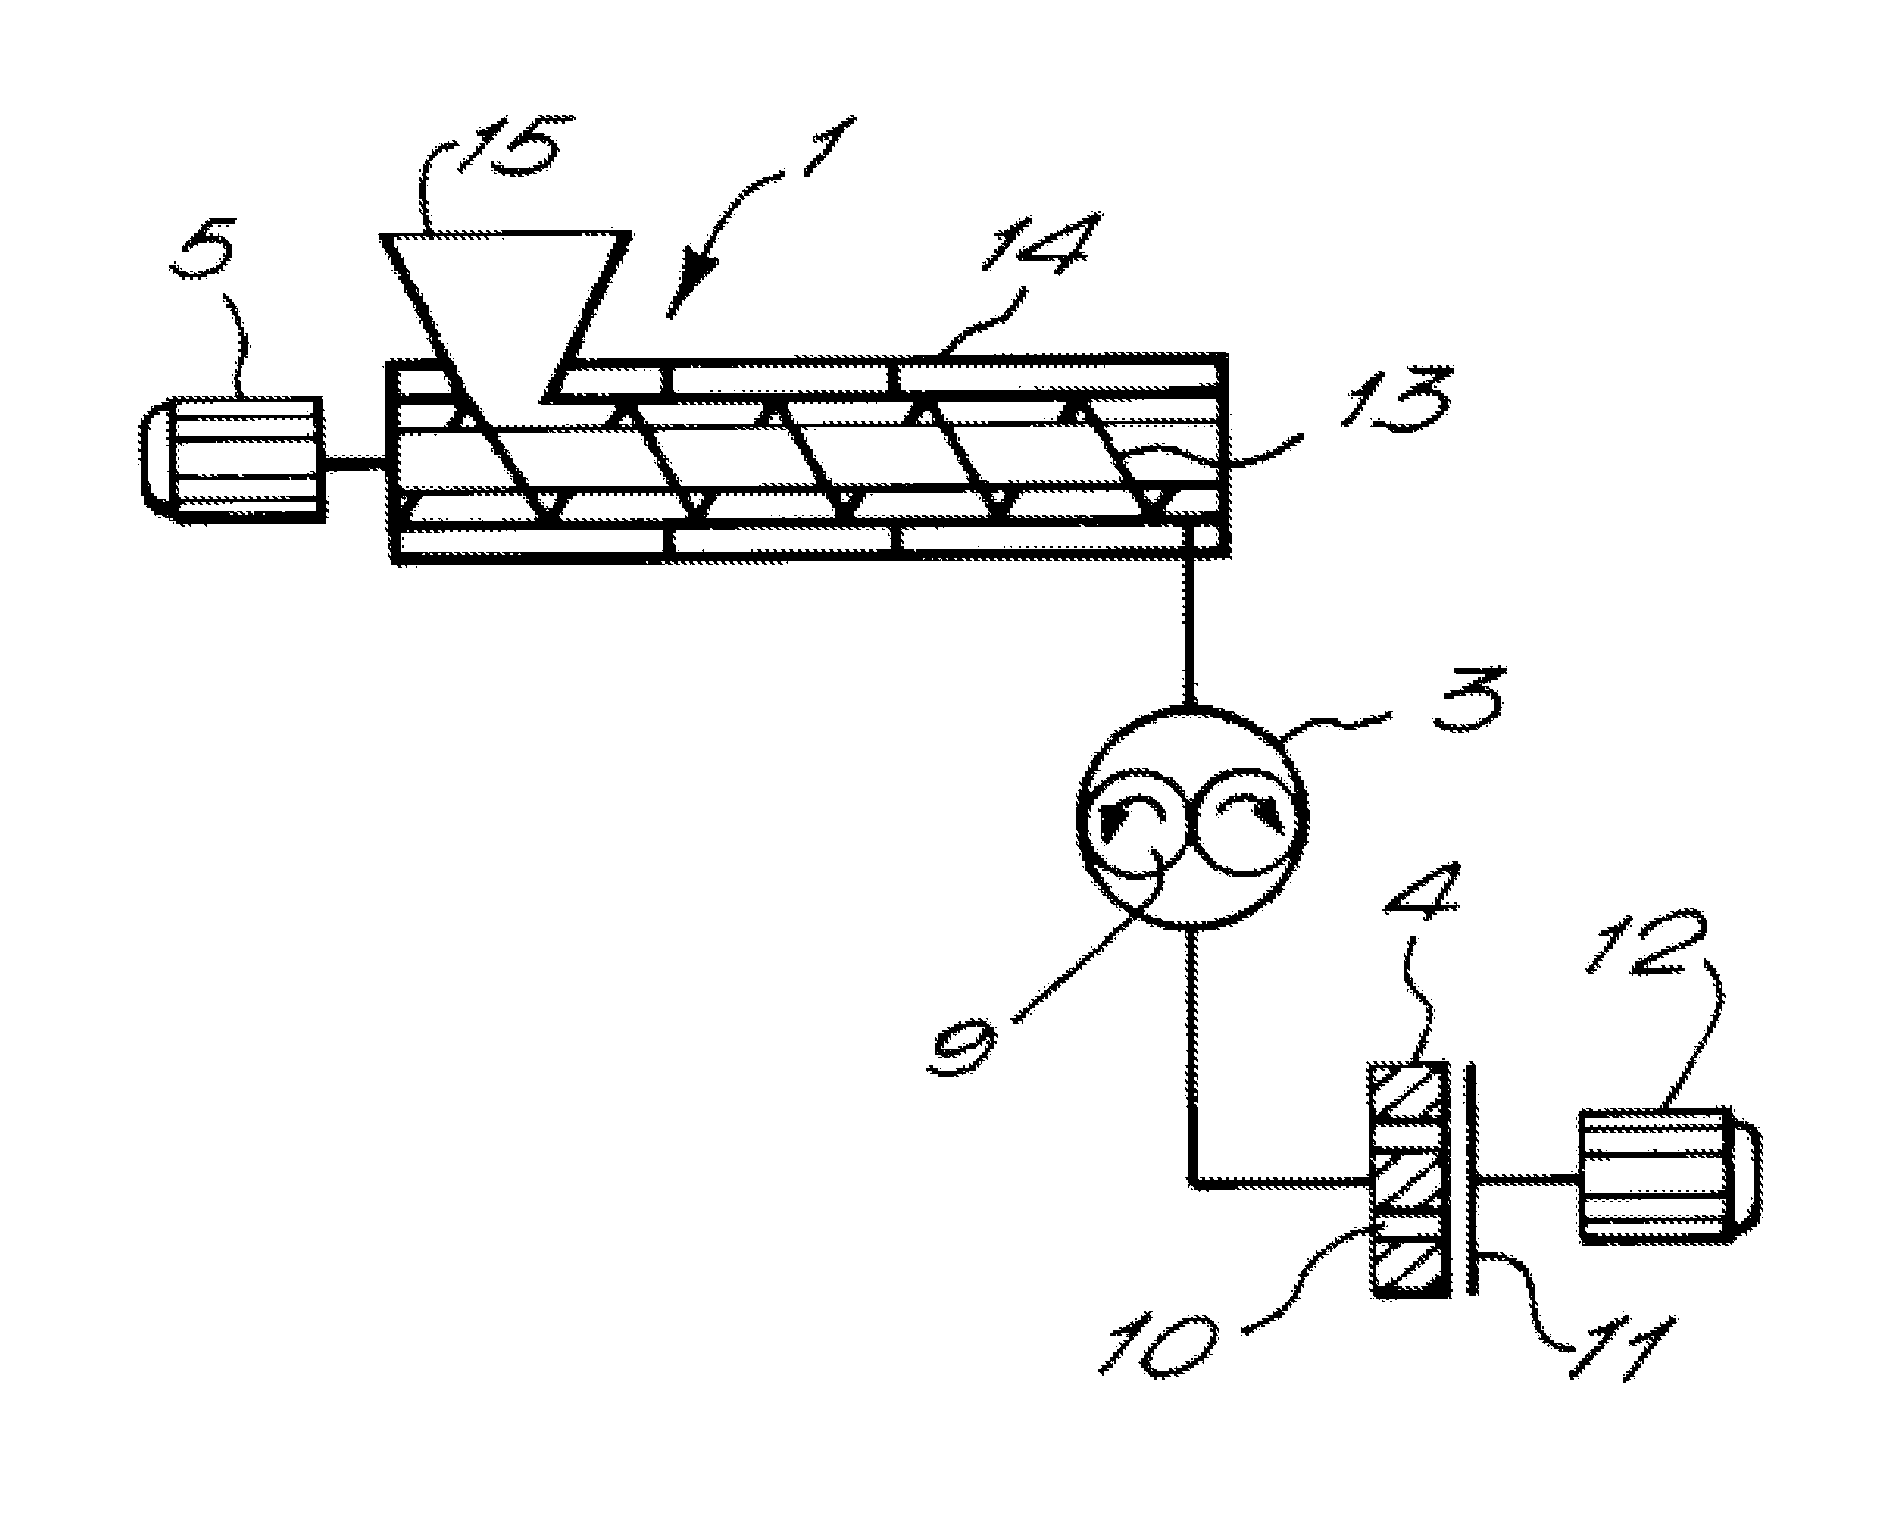 Apparatus and method for creating a food product